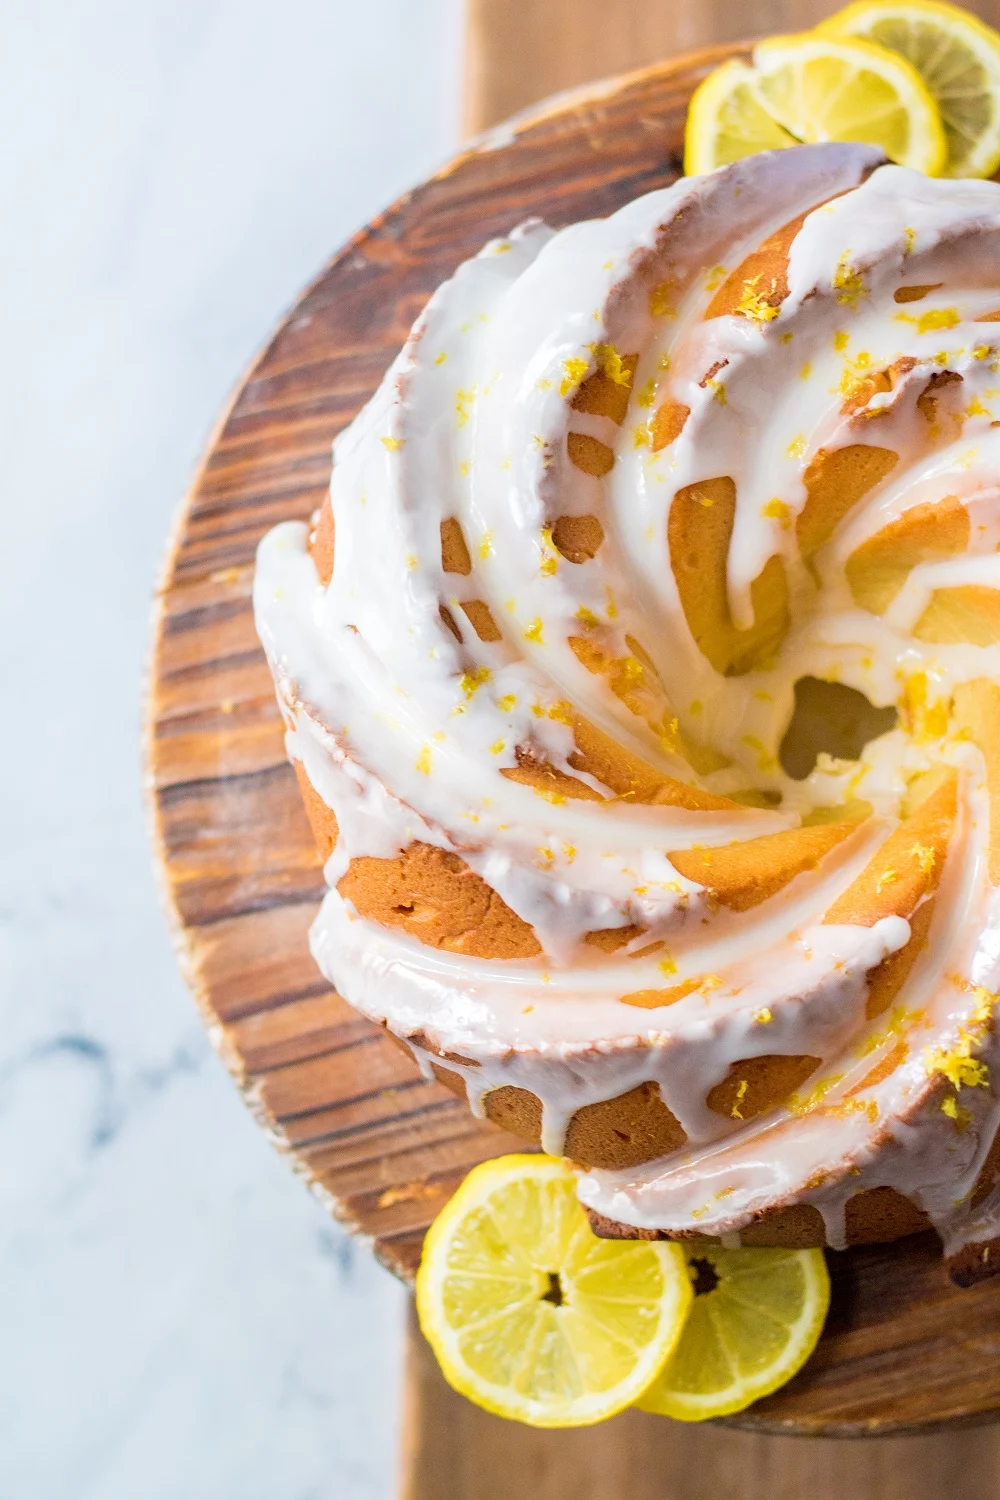 Made from scratch, this elegant lemon cream cheese bundt cake is the perfect dessert for a celebration. It’s a buttery, creamy and lemony cake that’s drizzled with a delectable glaze and a garnish of lemon zest, making it a lovely addition to any dessert table. via @Mooreorlesscook